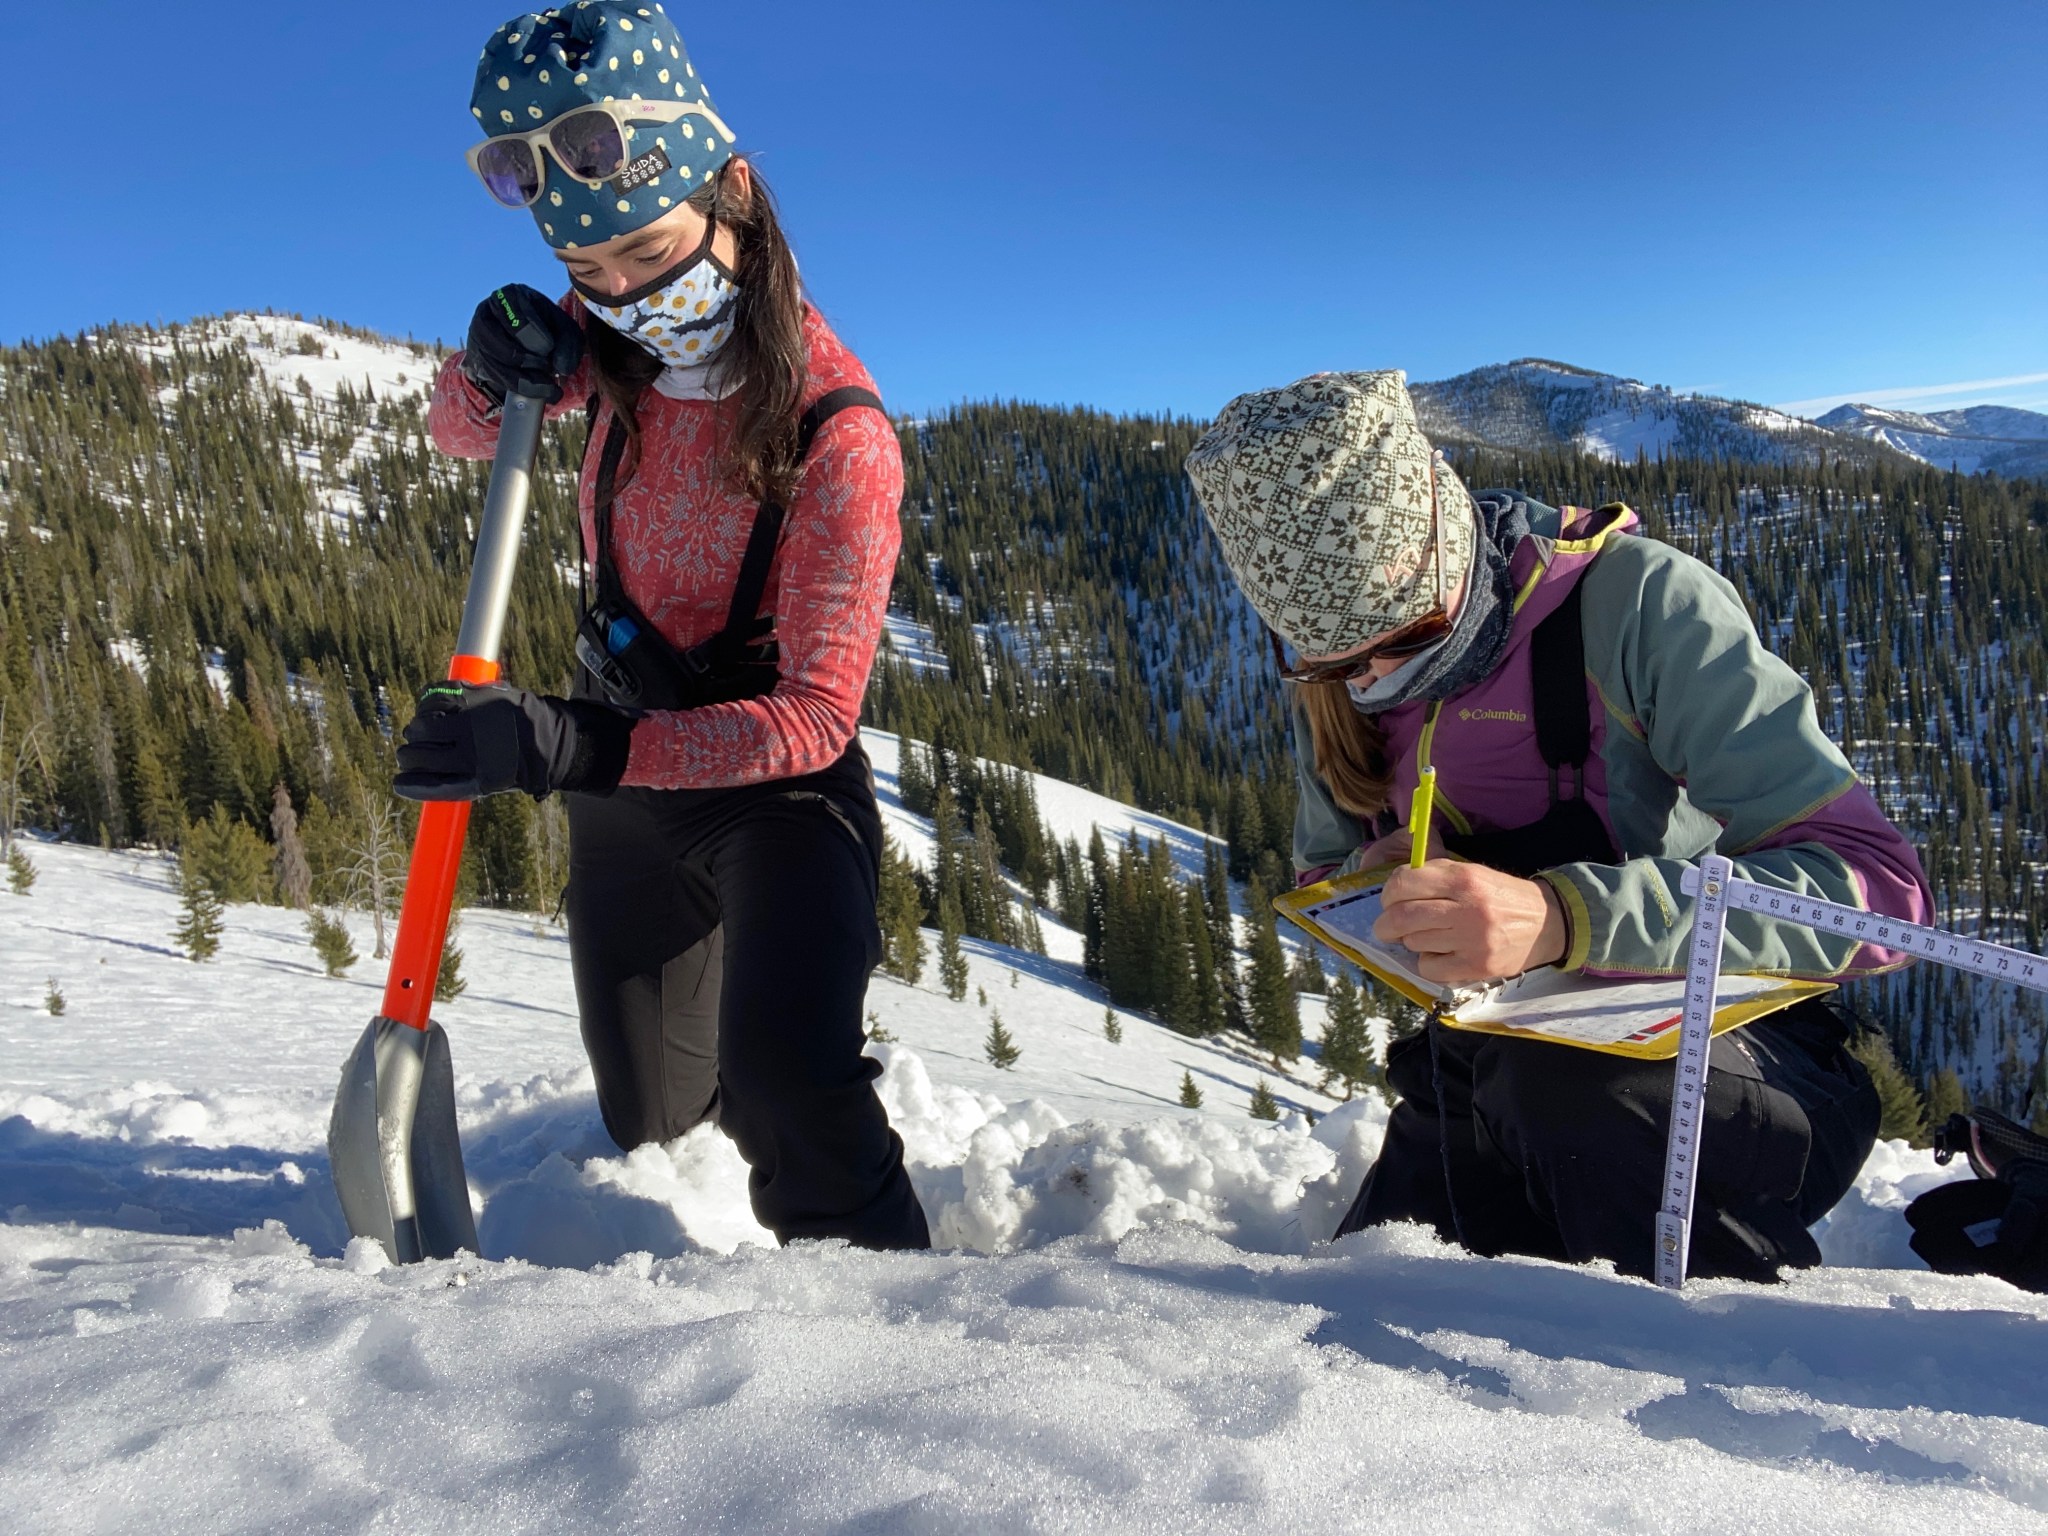 Snow scientists taking handheld measurements on a snowy hill.